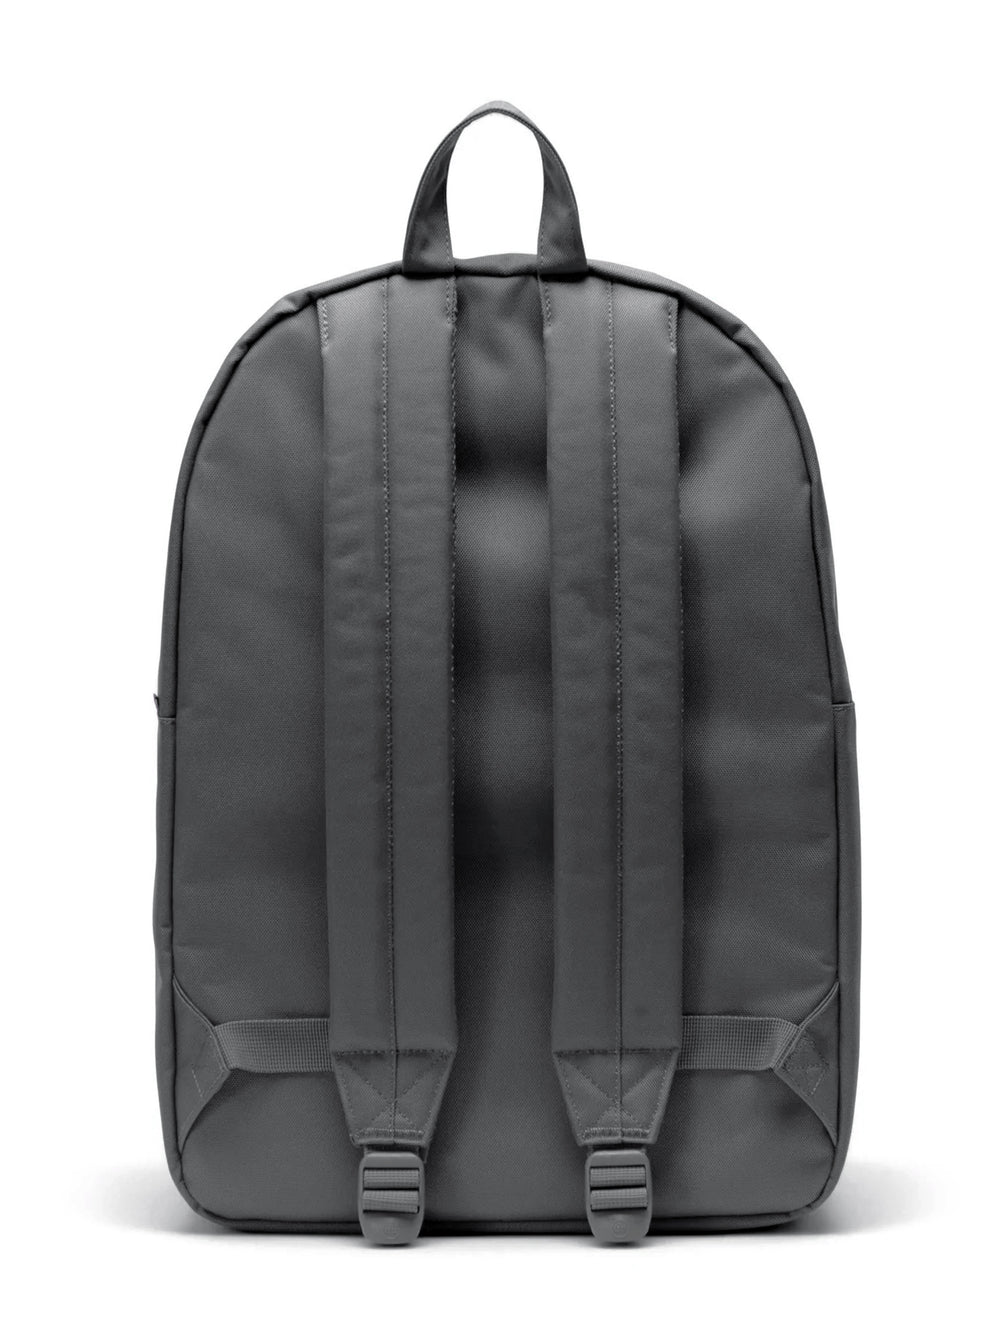 HERSCHEL SUPPLY CO. MIDWAY 25L - GARGOYLE GRY BACKPACK